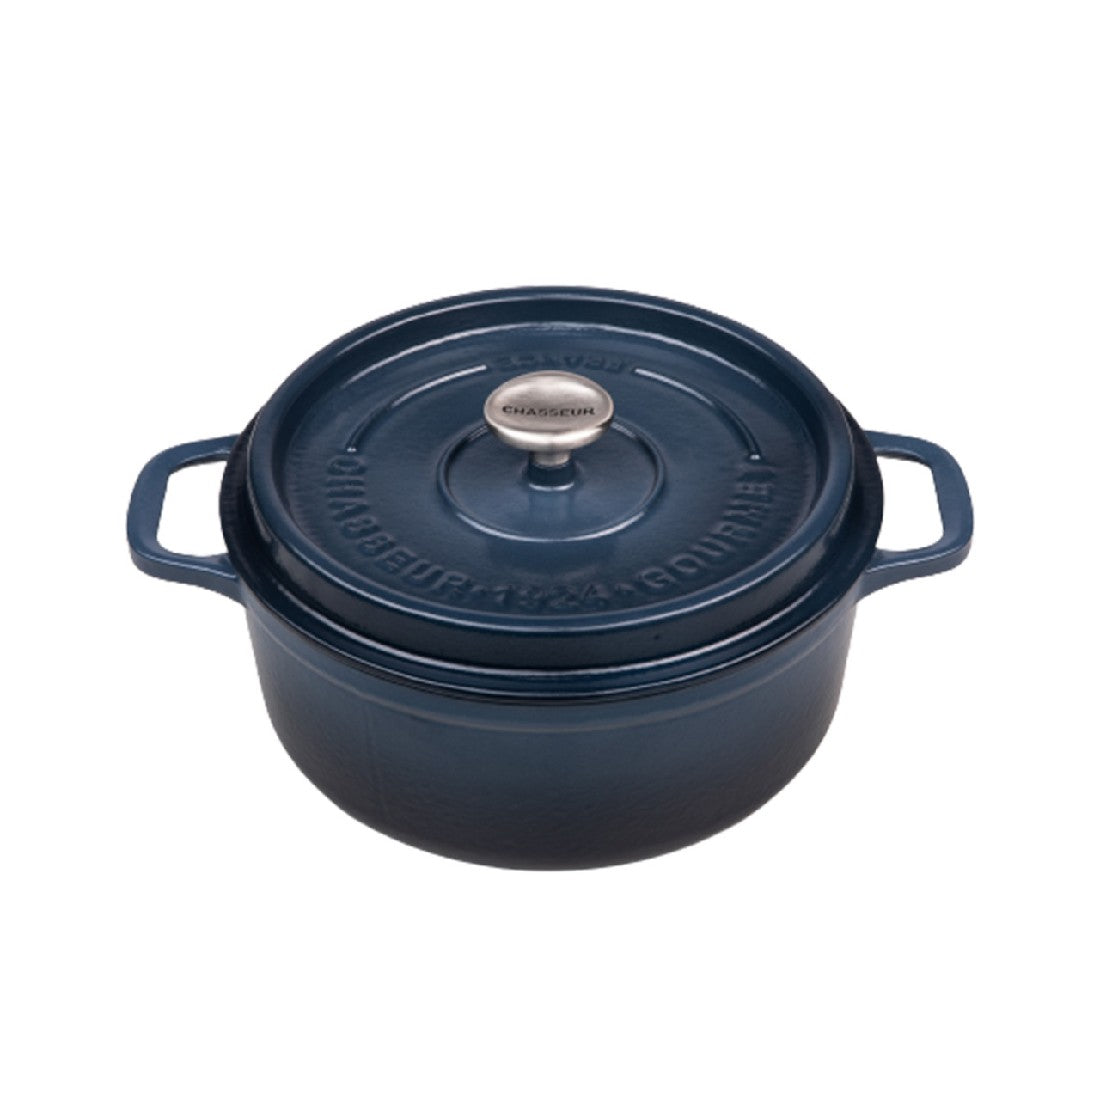 Chasseur Gourmet Round French Oven 24cm/4l Midnight Blue